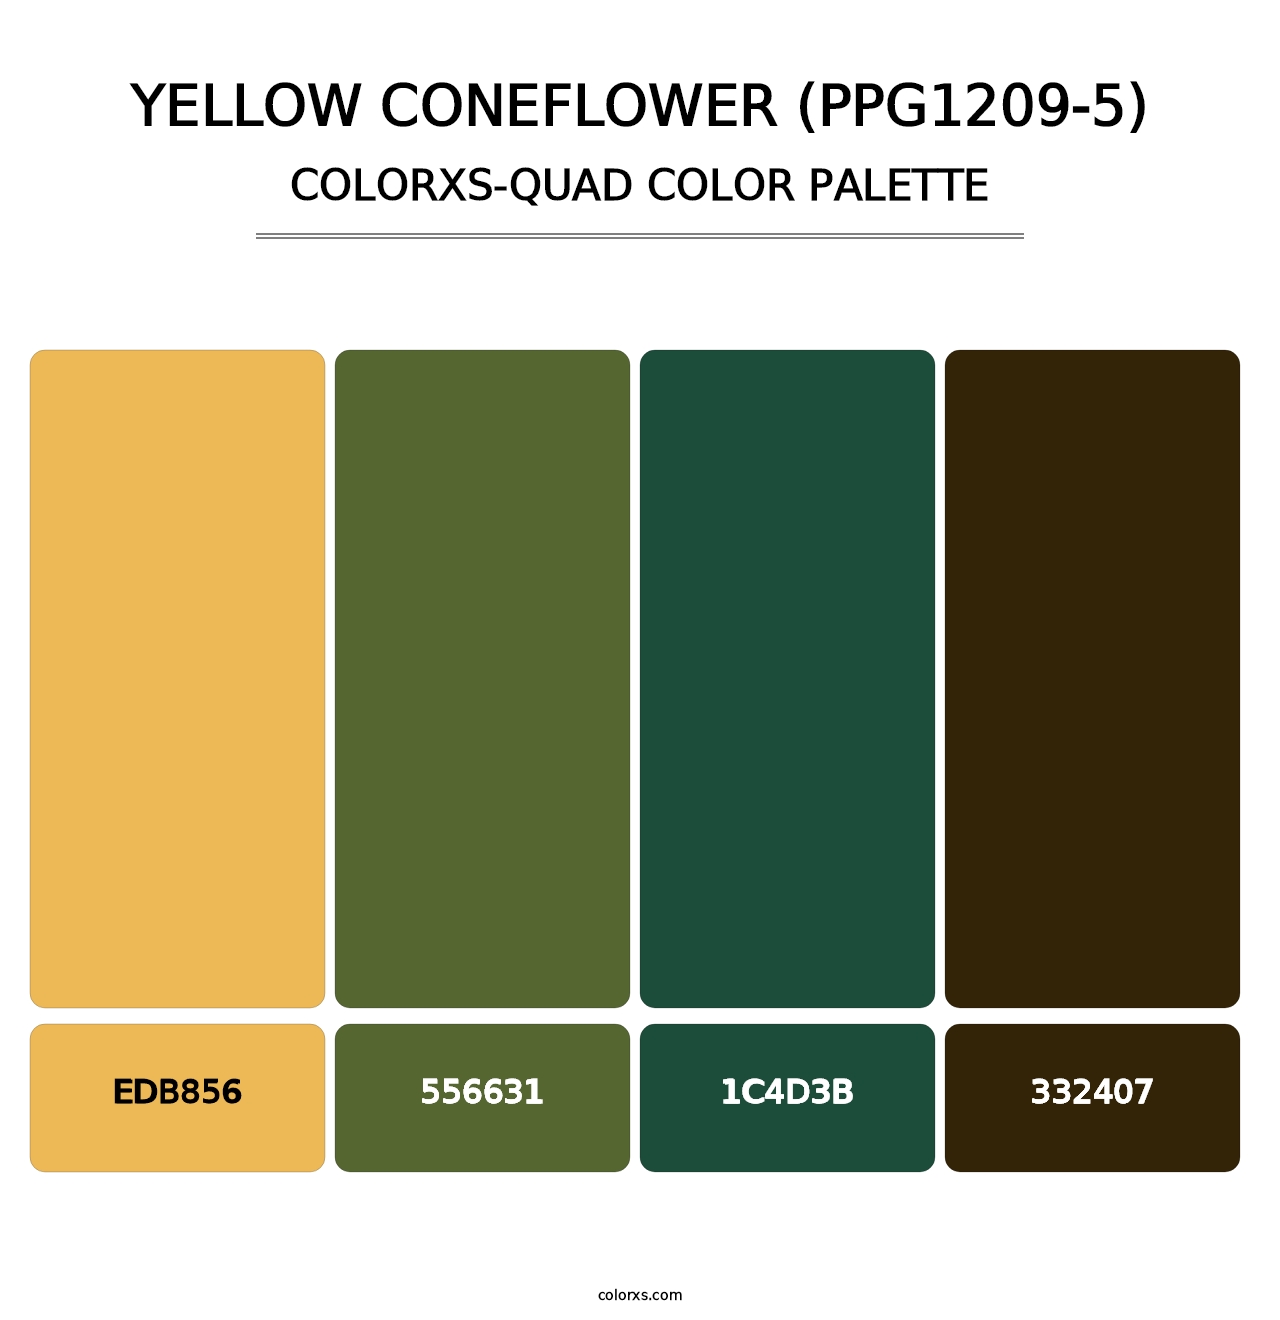 Yellow Coneflower (PPG1209-5) - Colorxs Quad Palette